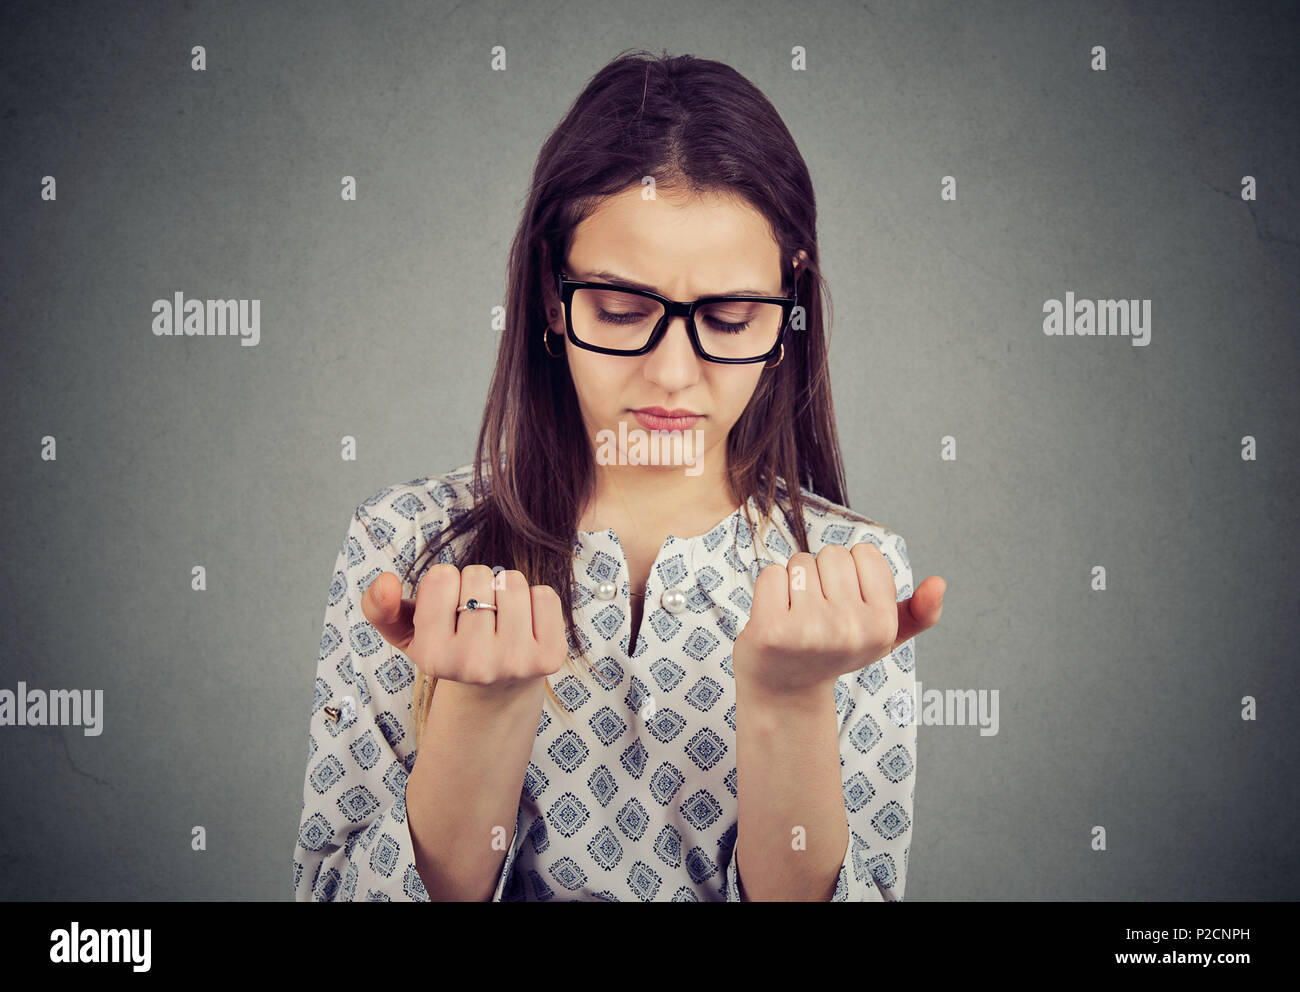 Perfectionist young woman looking at fingers nails obsessing about cleanliness Stock Photo